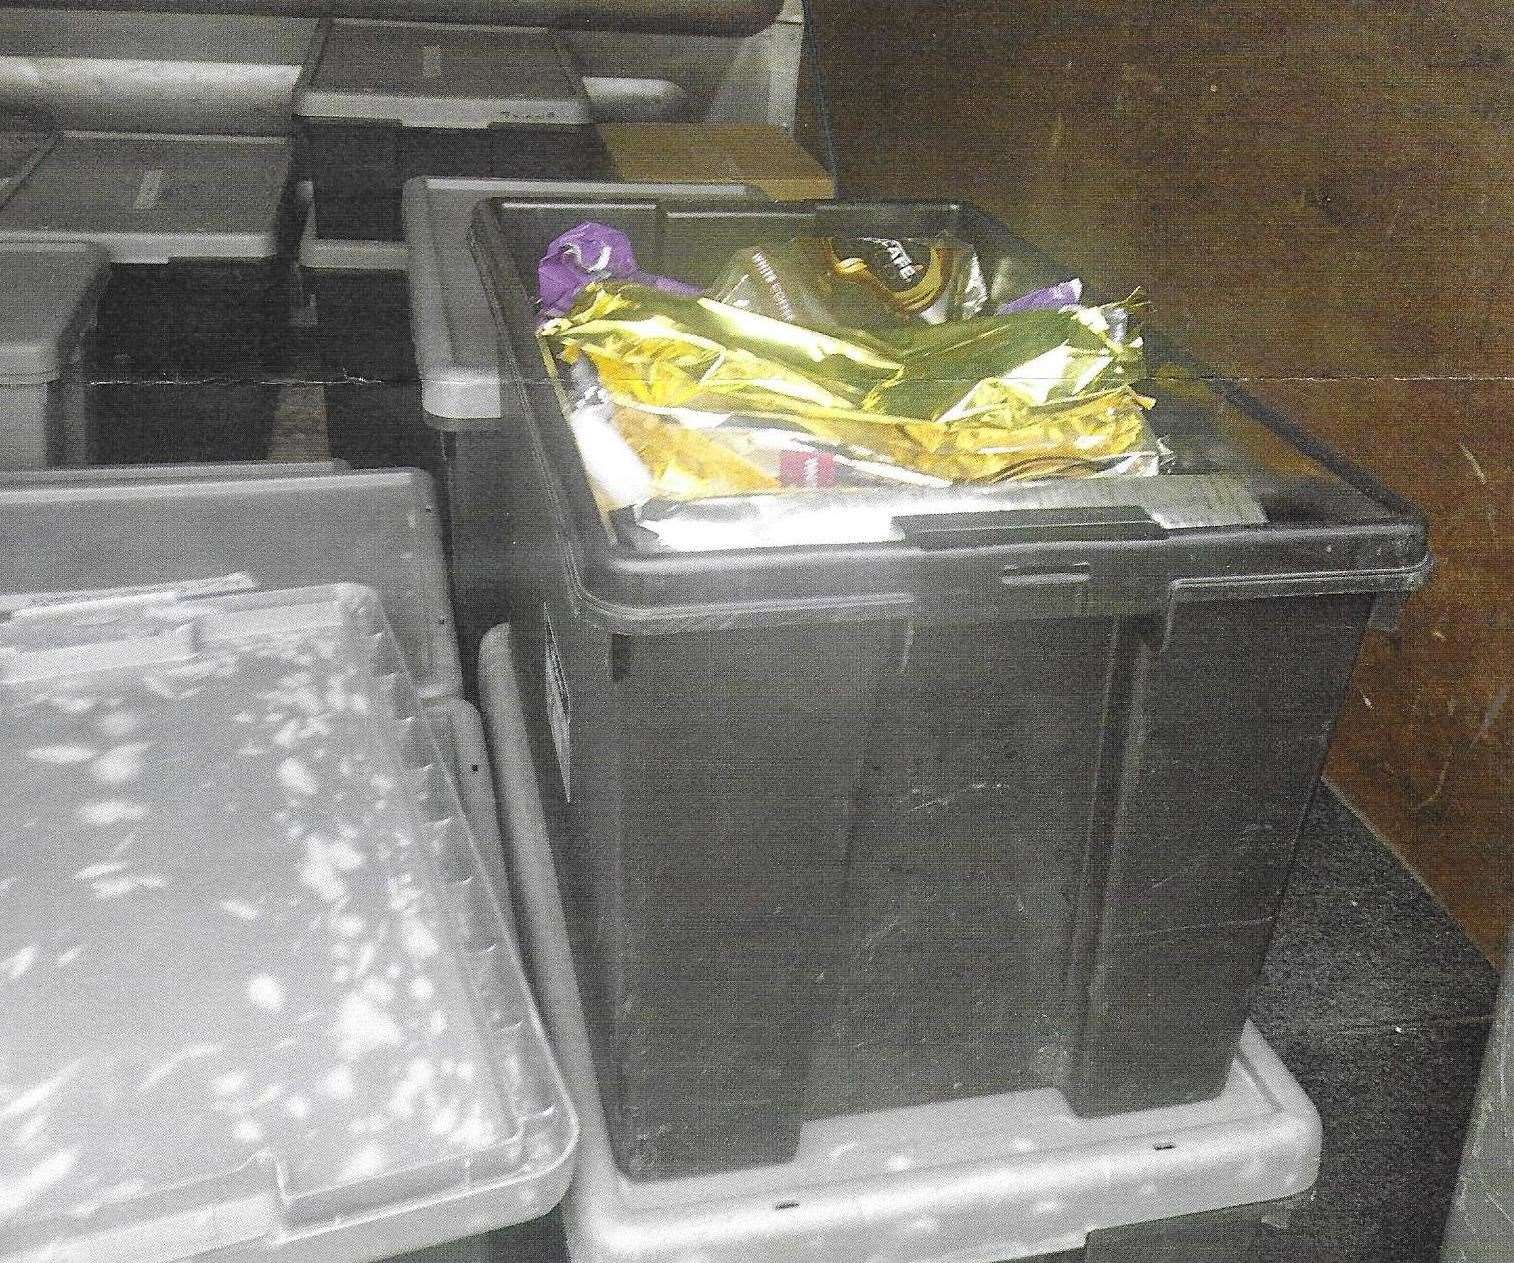 The offending waste, three gold coffee wrappers, in the back of the van. Picture provided by Mike Steel